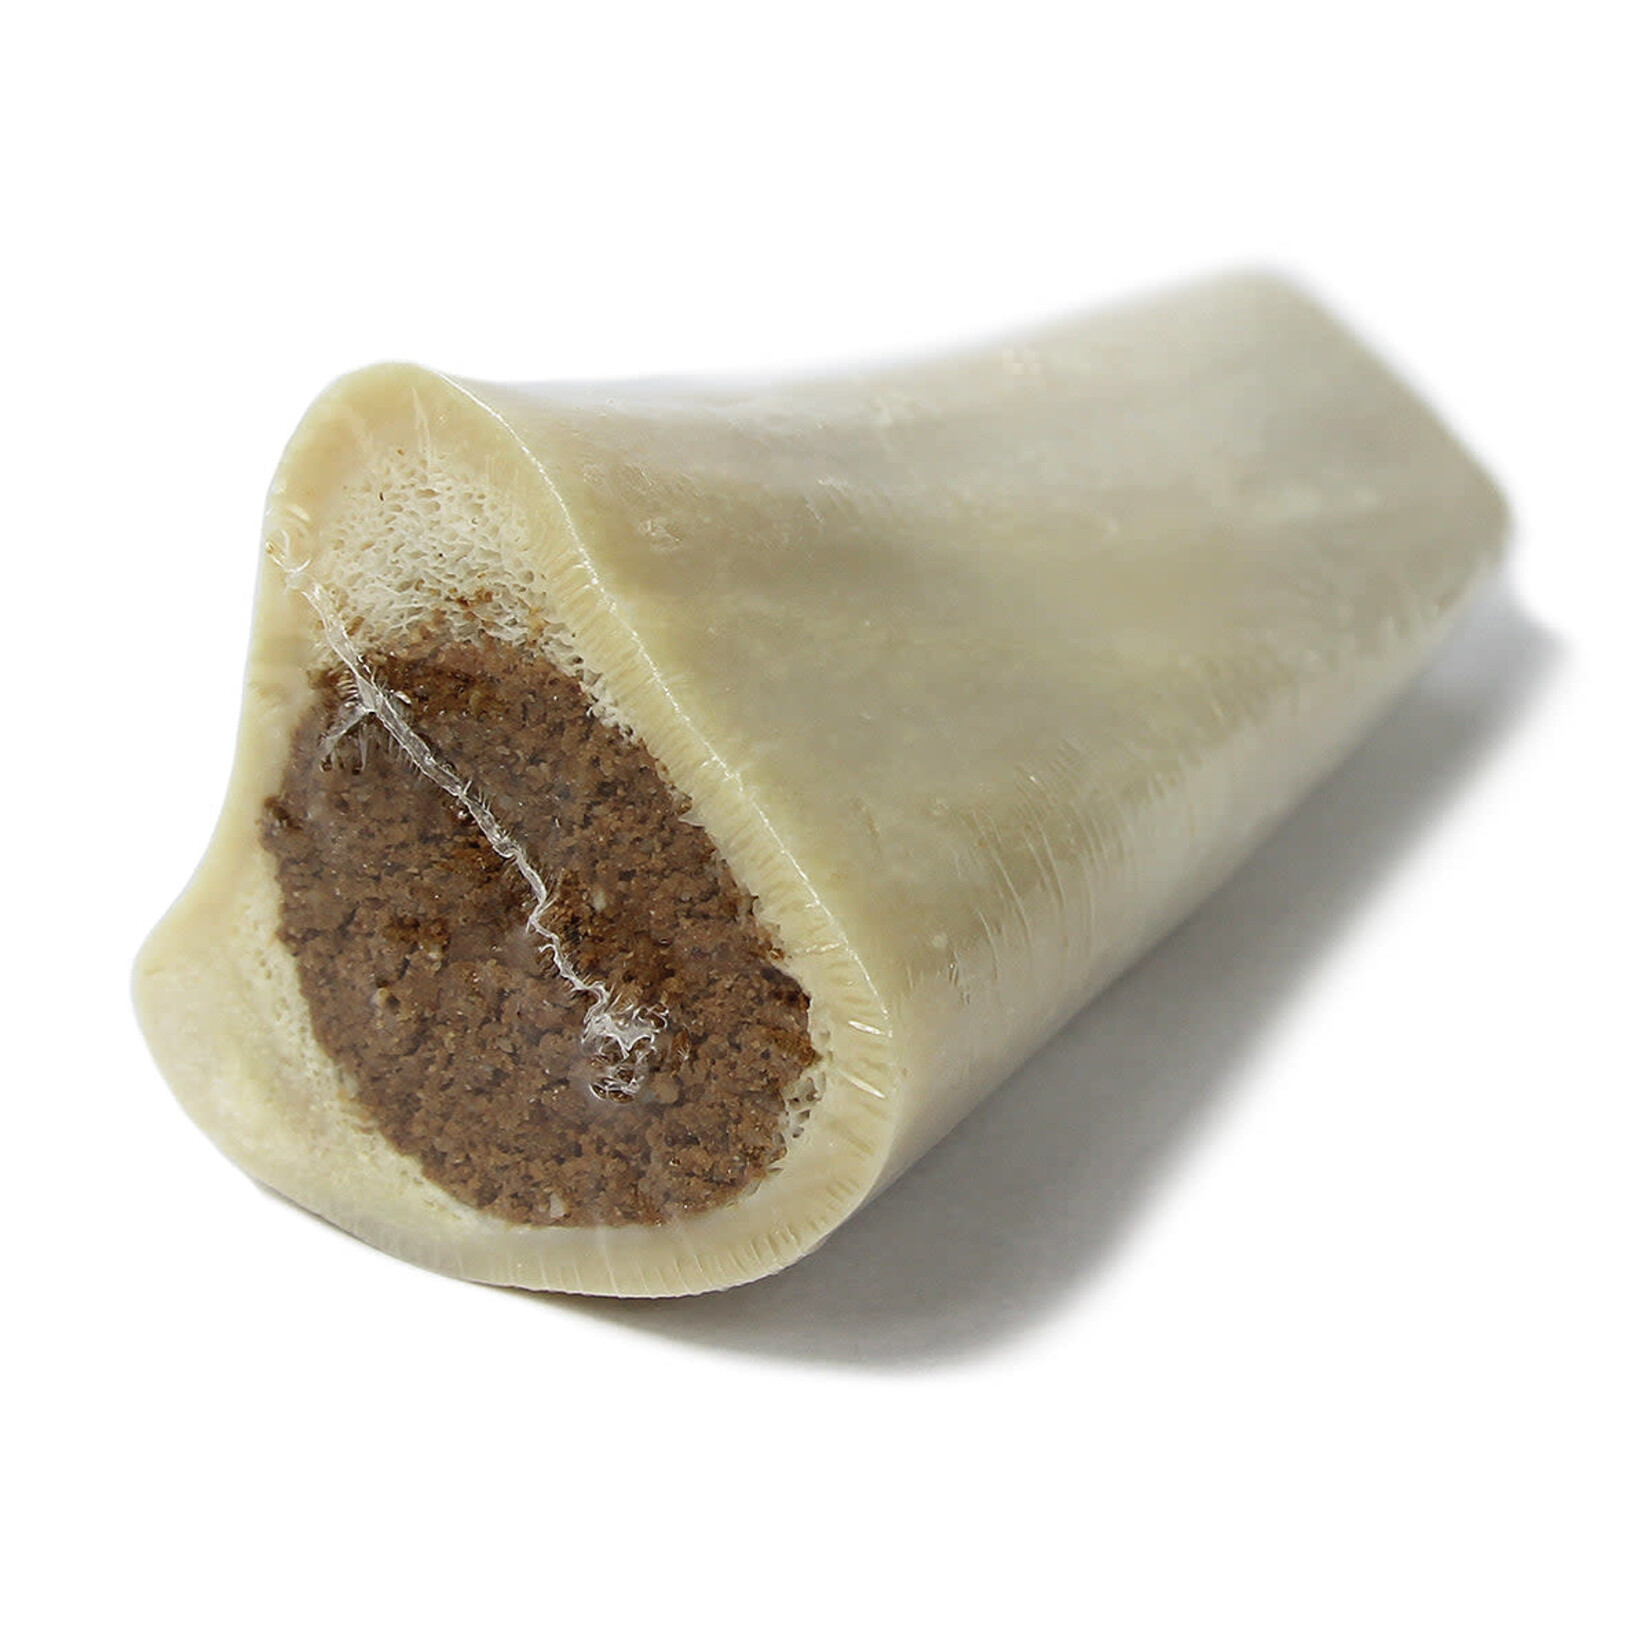 Tuesday's Natural Dog Company Filled Bone - Peanut Butter Flavor